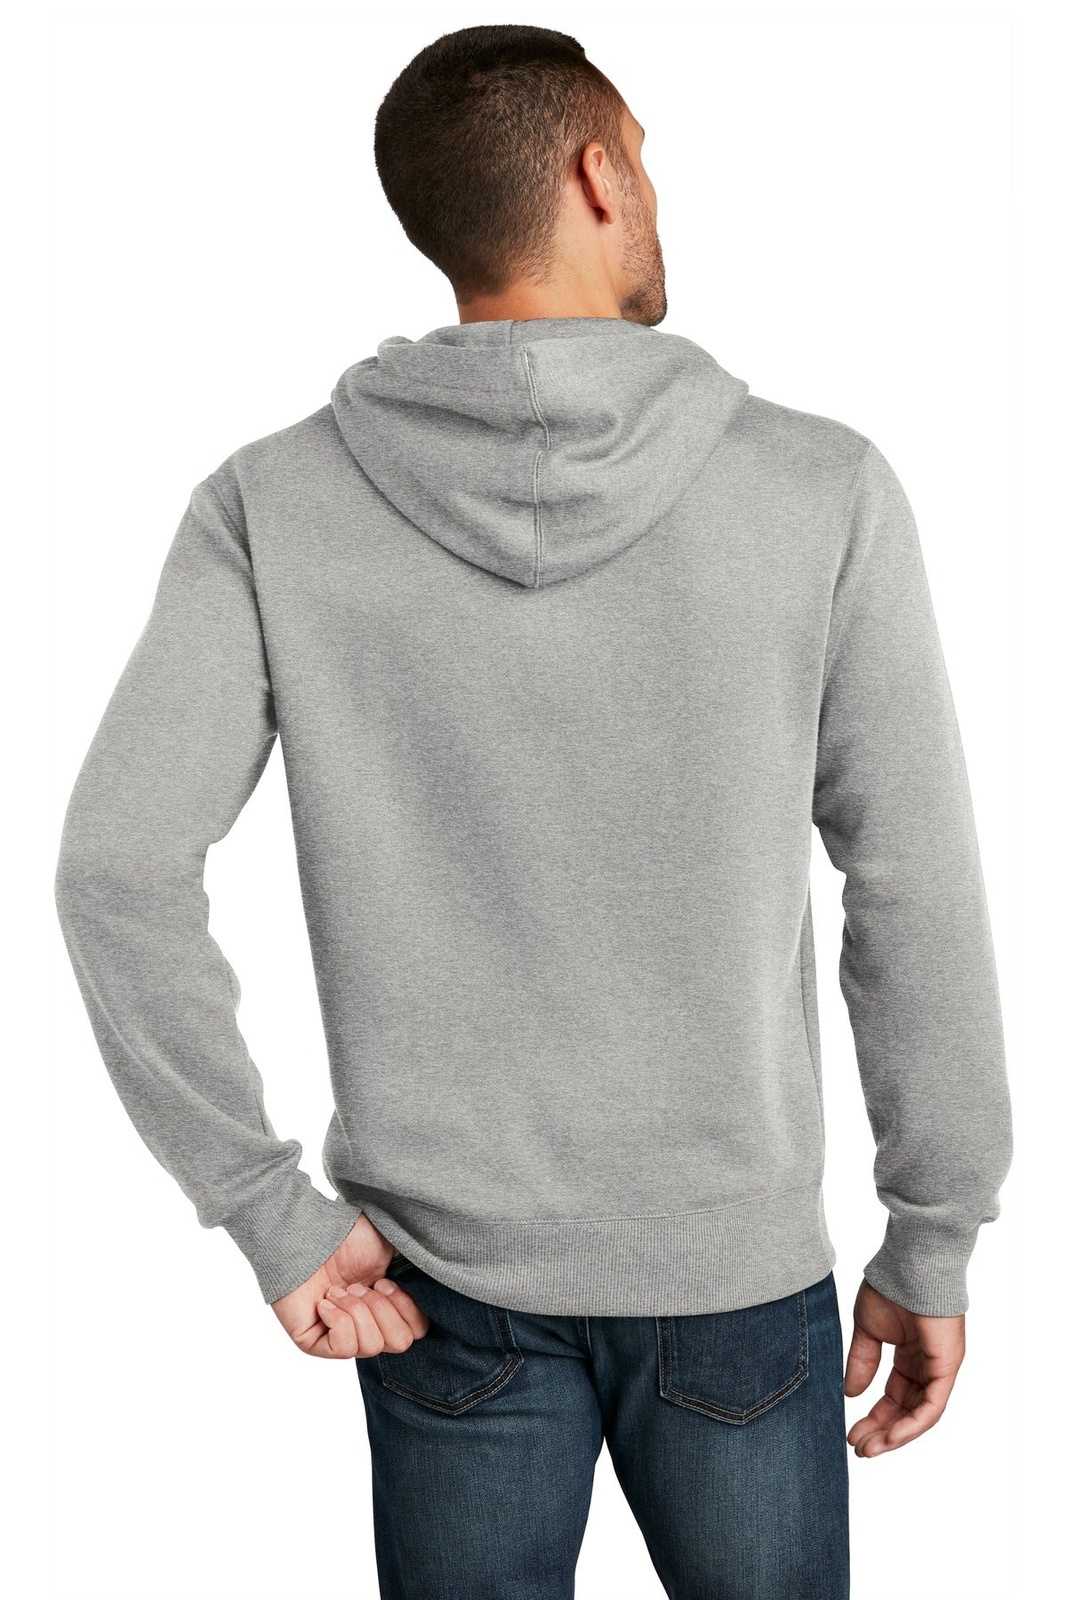 District DT1101 Perfect Weight Fleece Hoodie - Heathered Steel - HIT a Double - 2